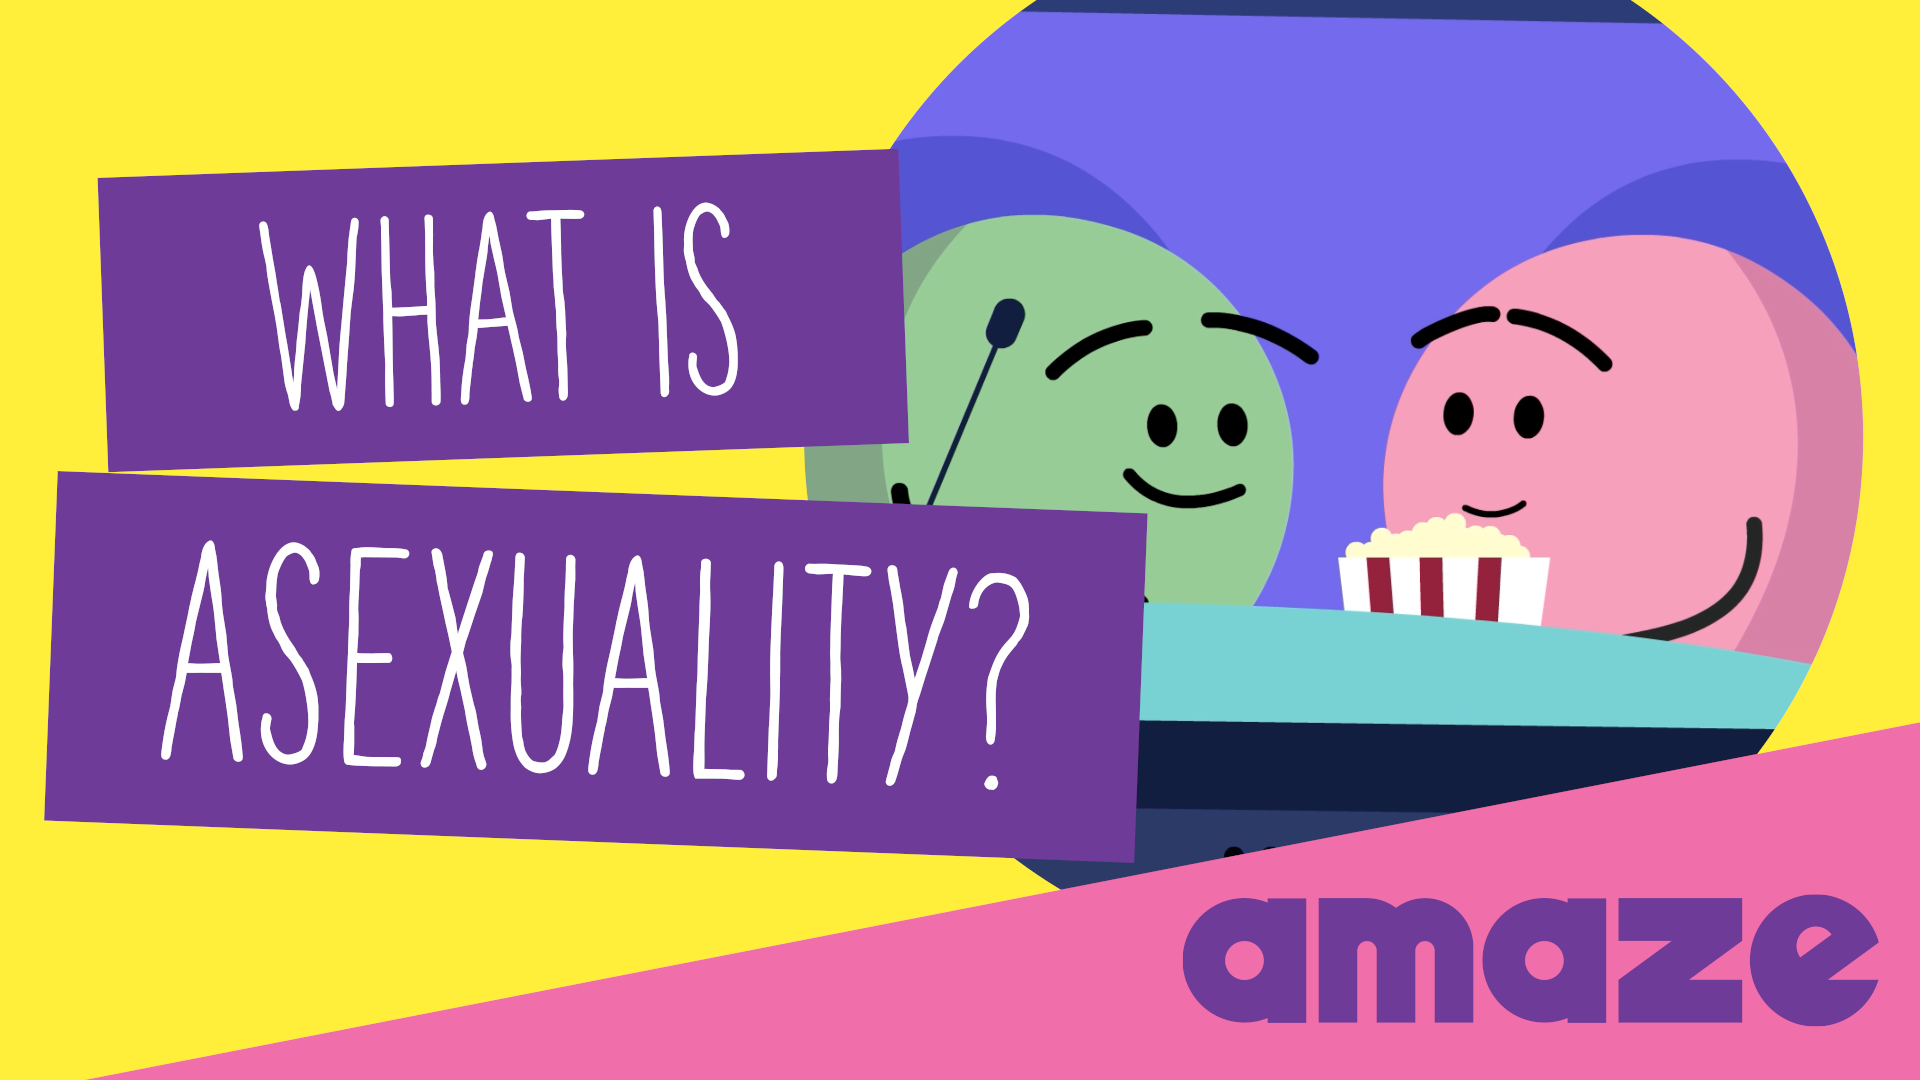 Video Sex Org Png - AMAZE - Age appropriate info on puberty for tweens and their parents